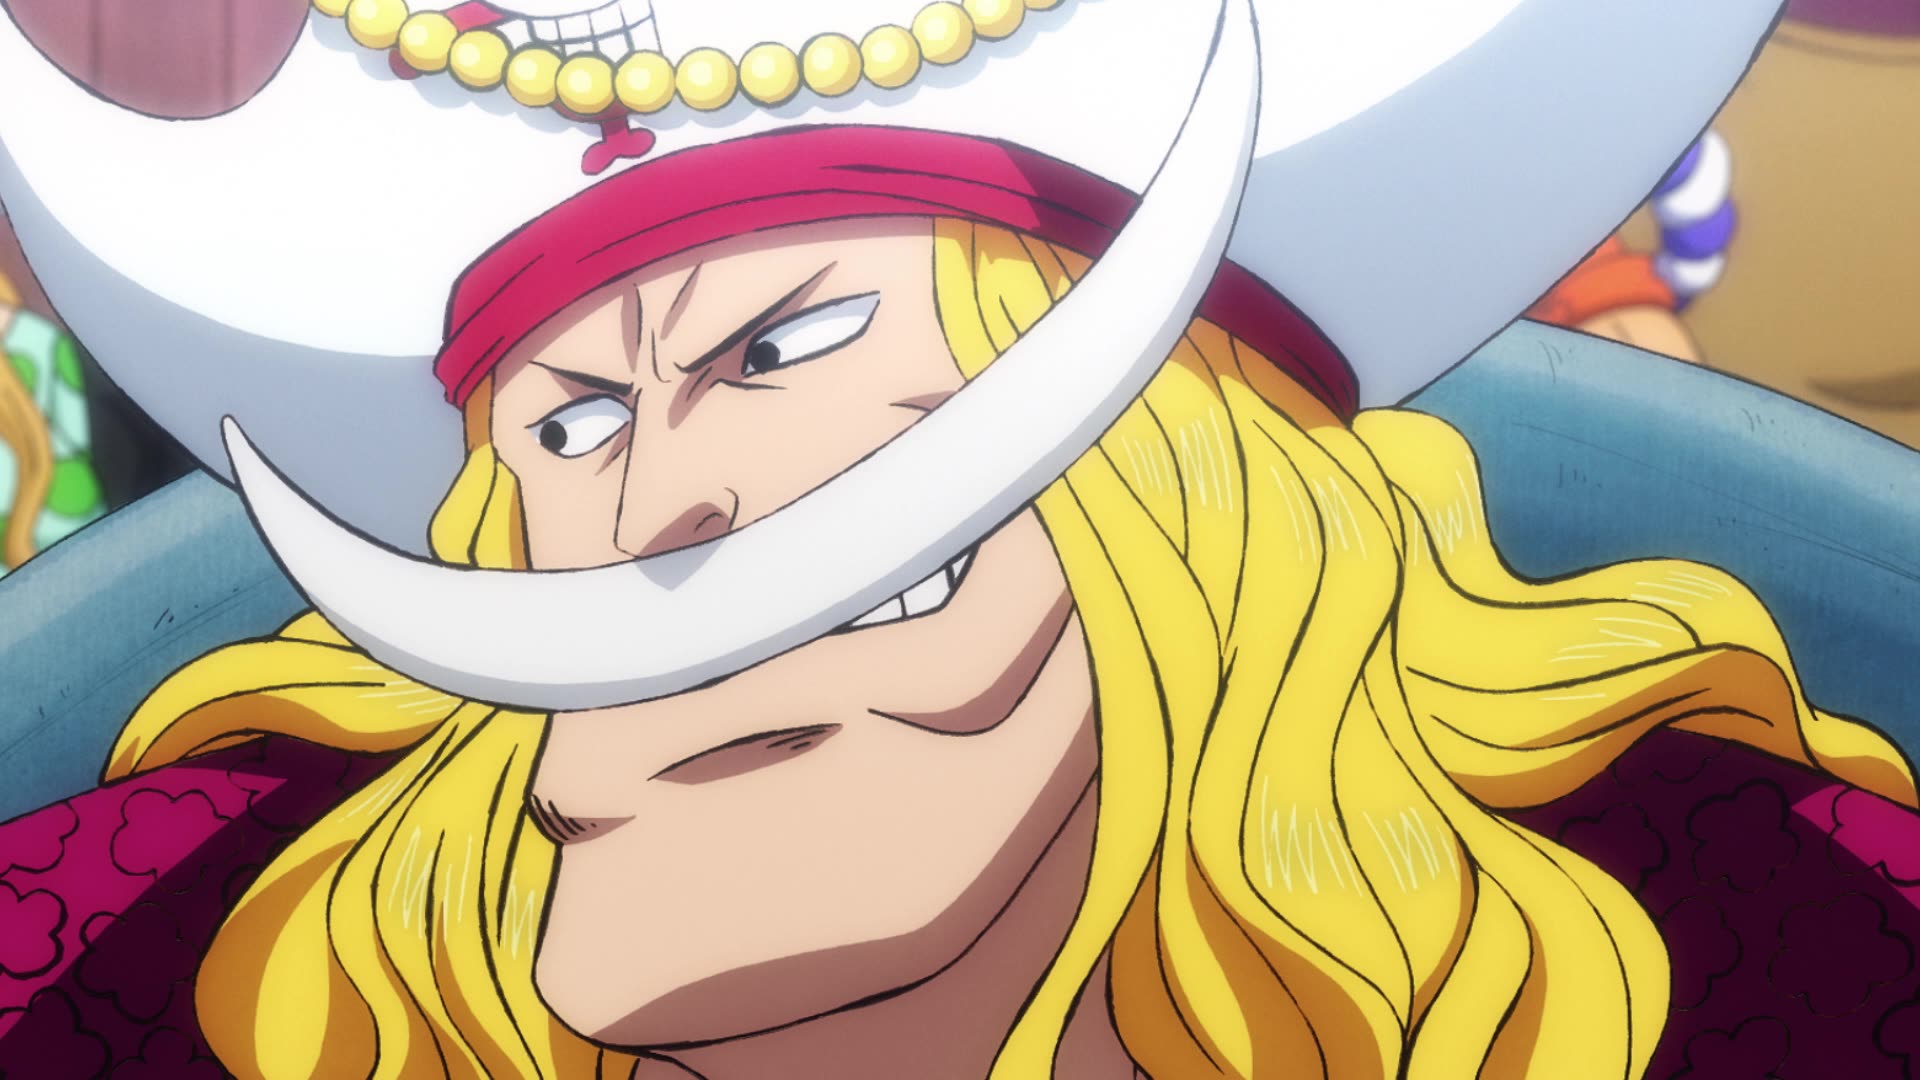 One Piece Wano Kuni 2 Current Episode 964 Whitebeard S Little Brother Oden S Great Adventure Watch On Crunchyroll